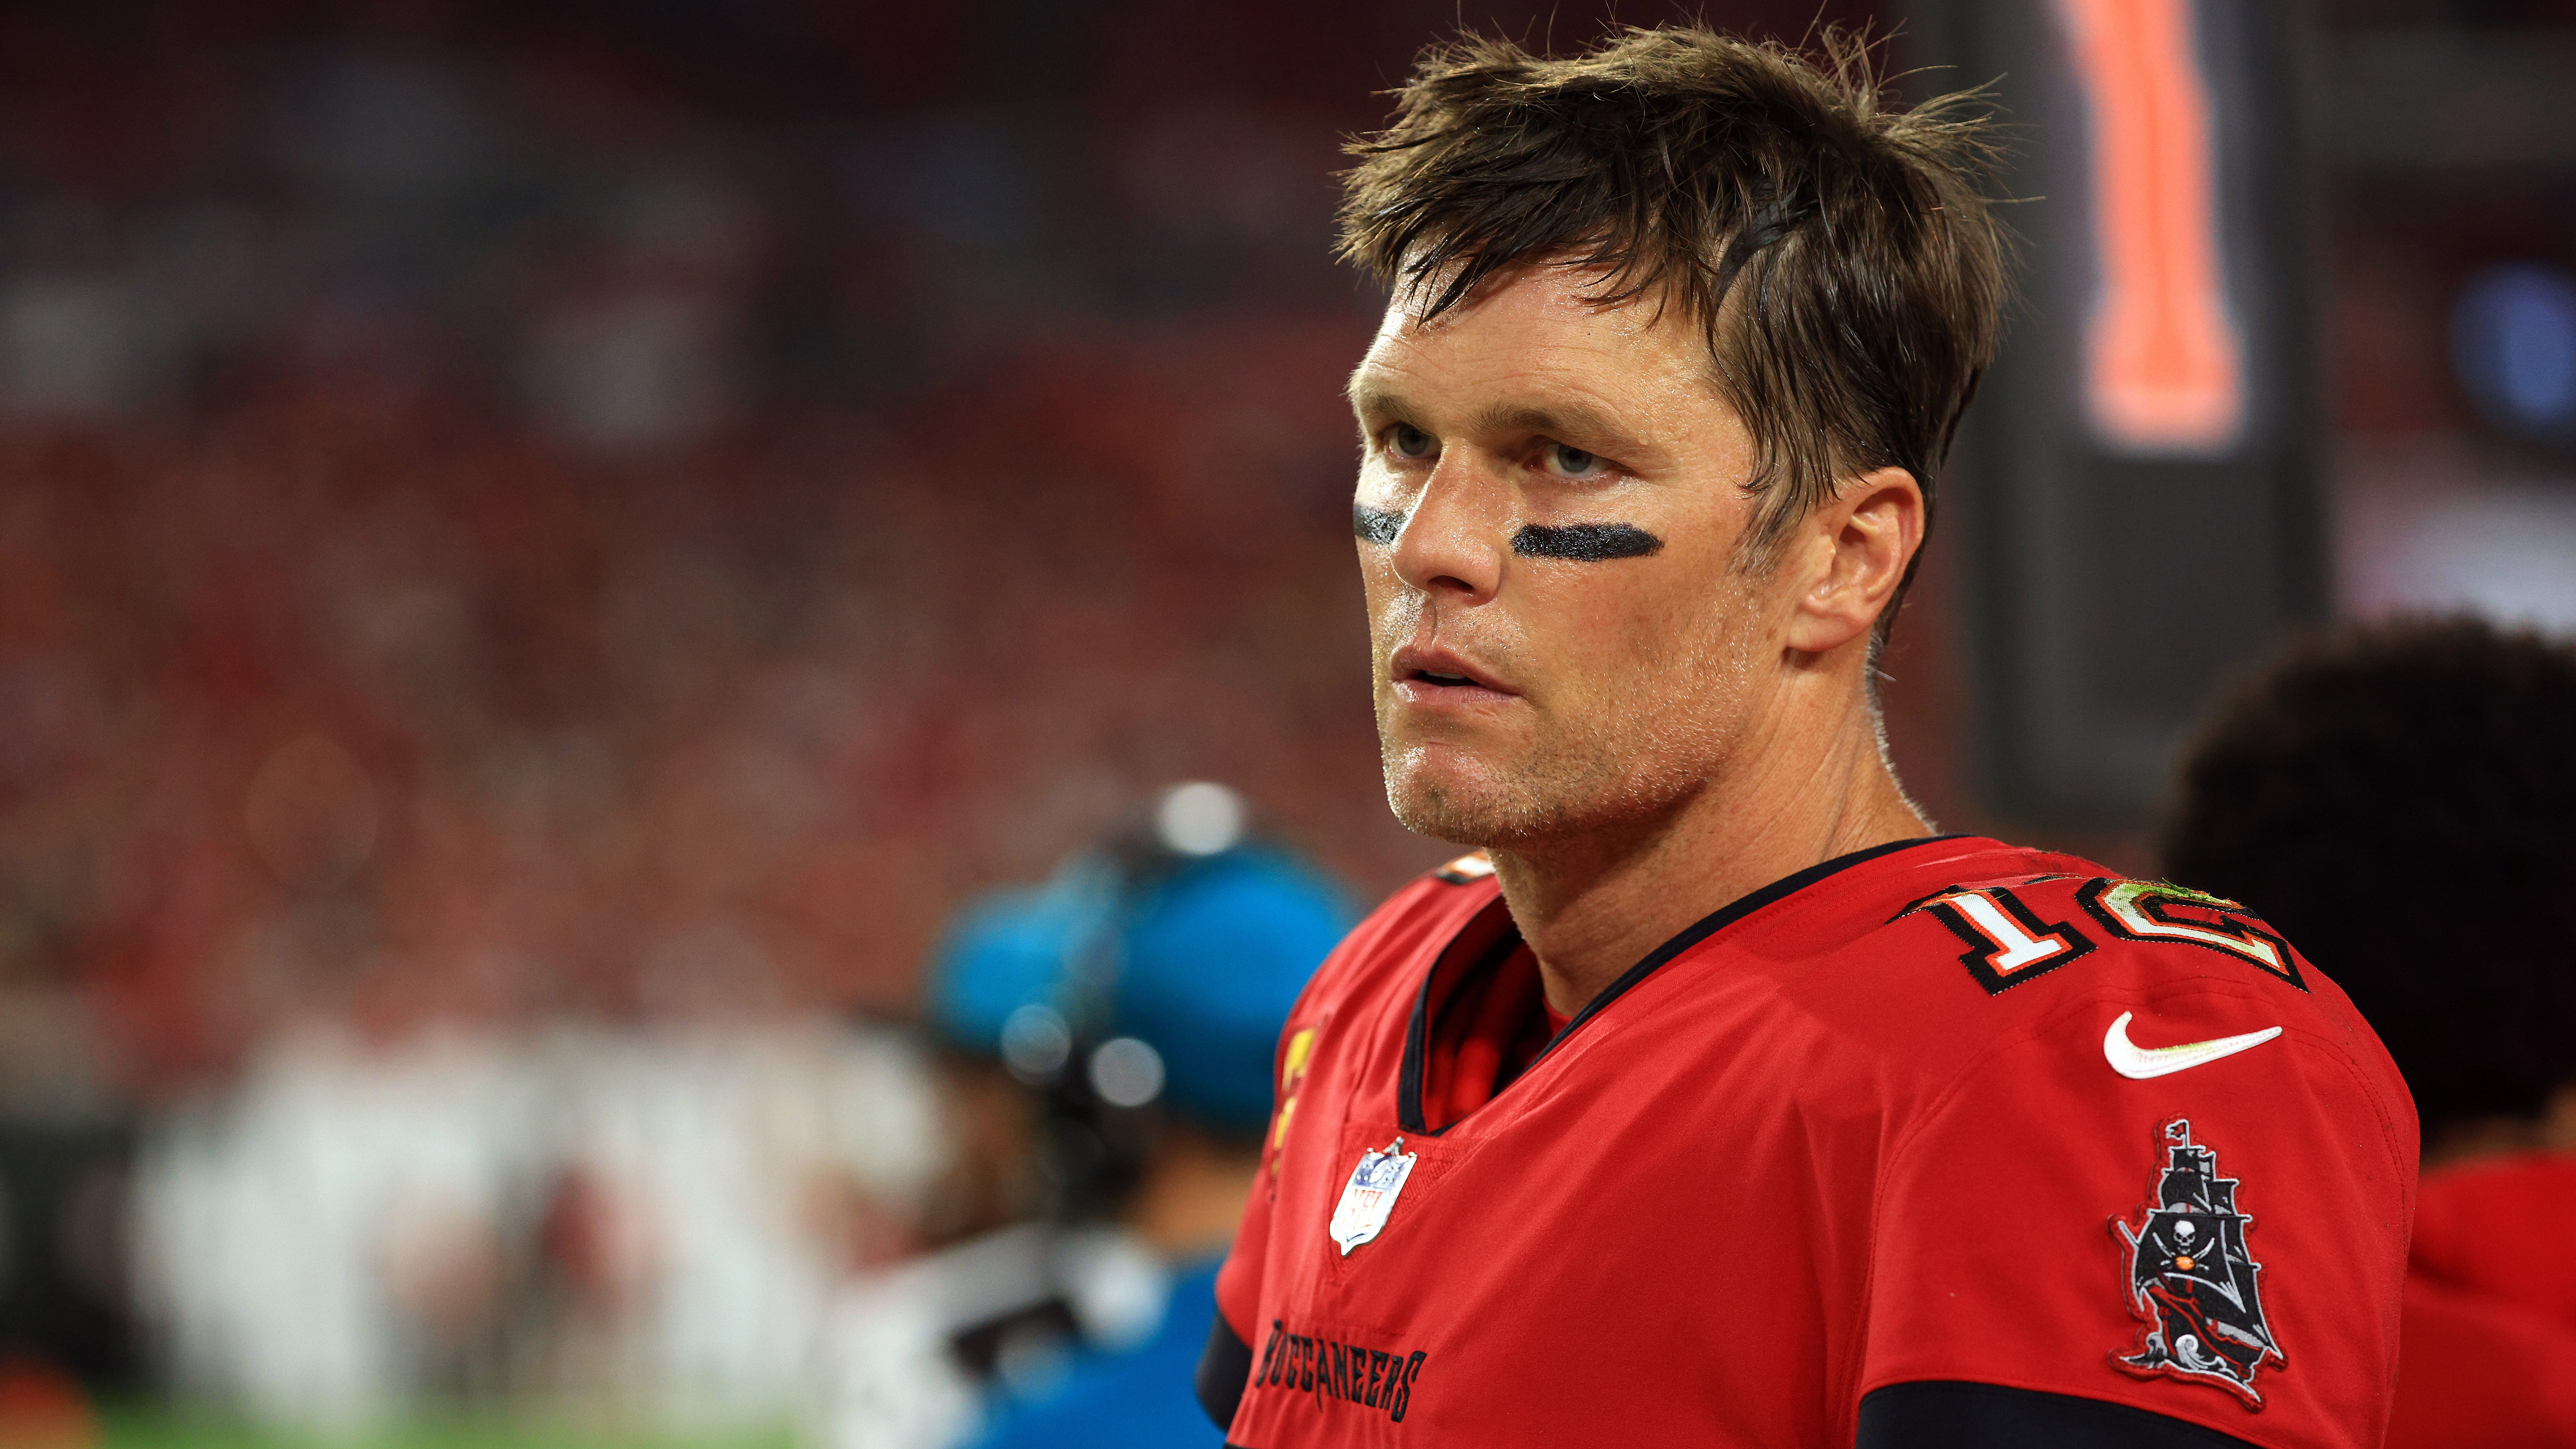 Bucs’ Tom Brady opens up about viral meltdown colorful exchange with Saints coach – Fox News